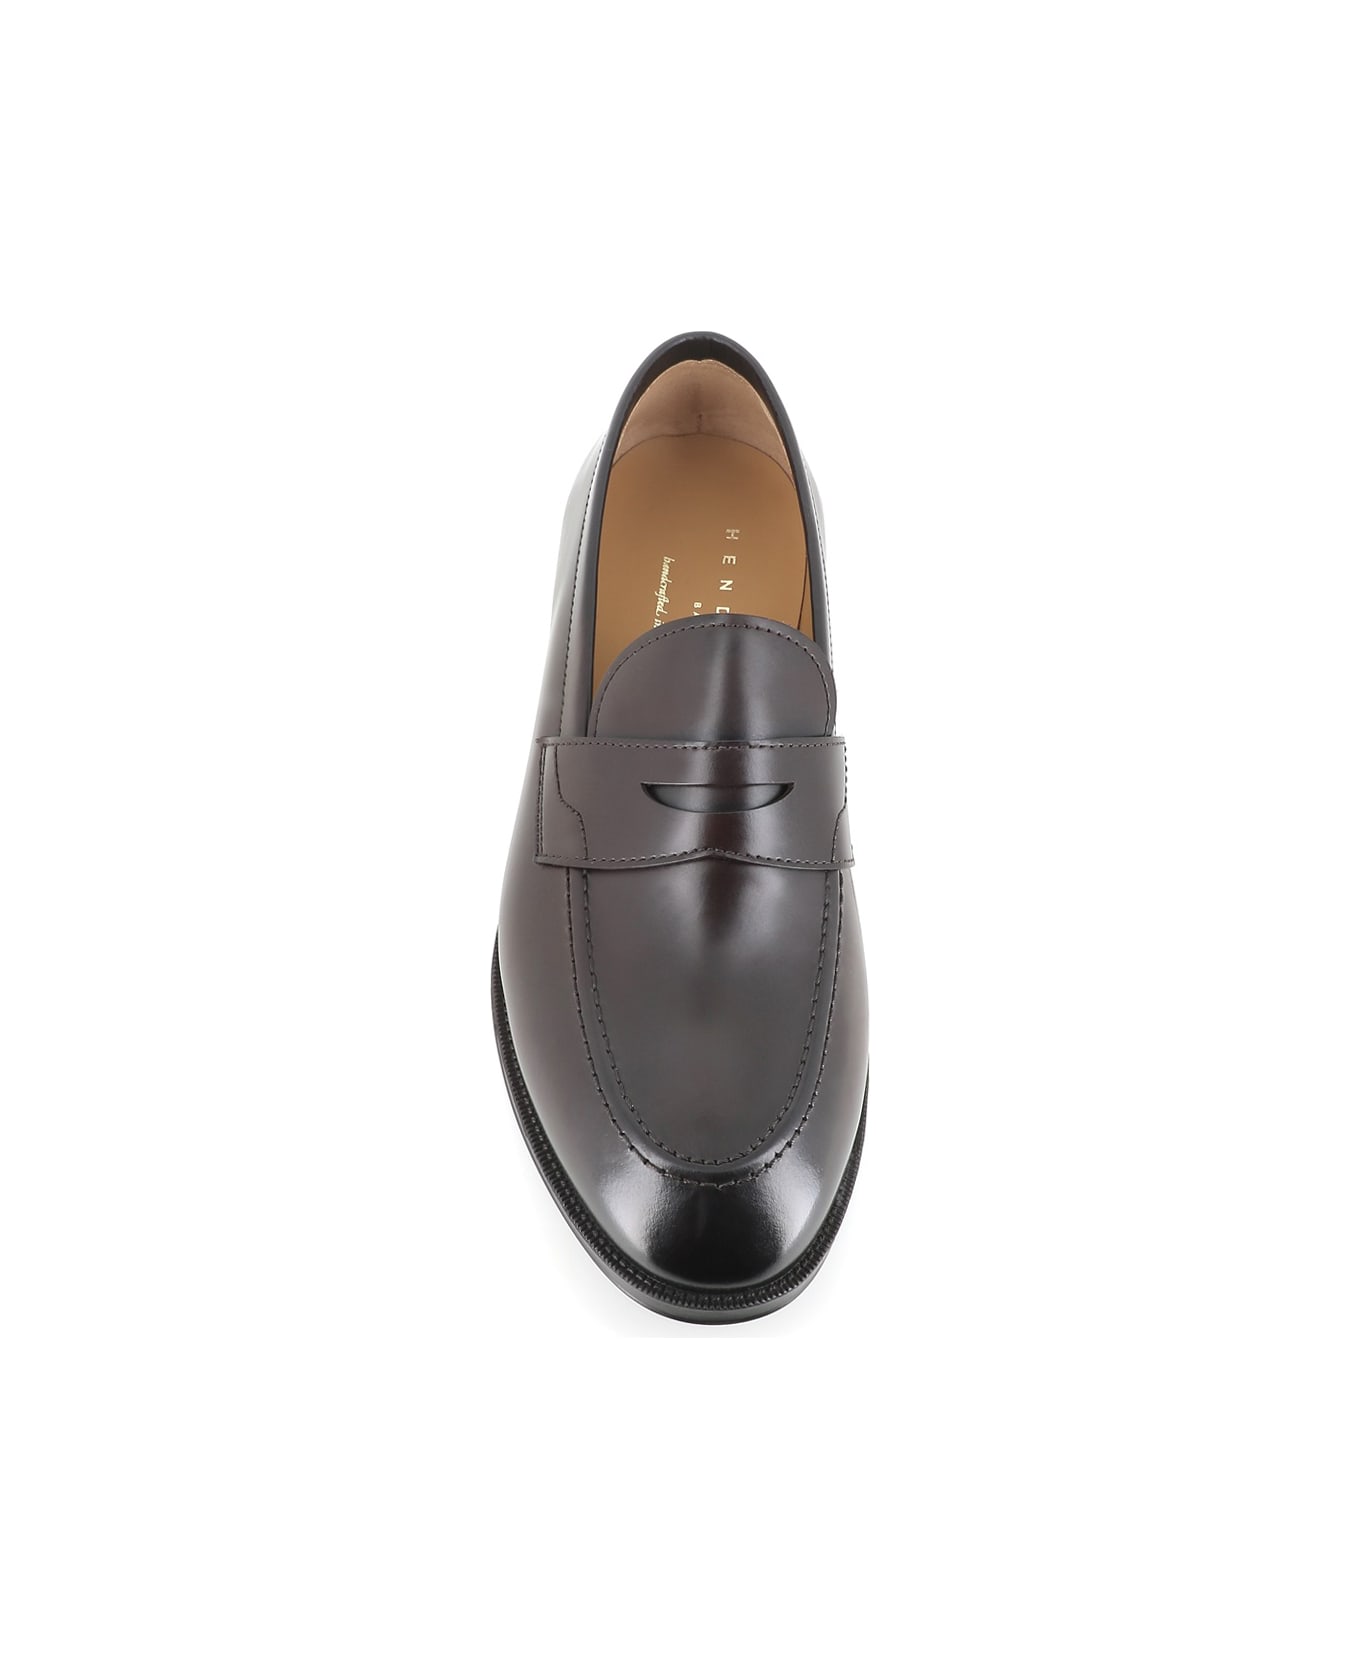 Henderson Baracco Loafer 83416.p.0 - Brown